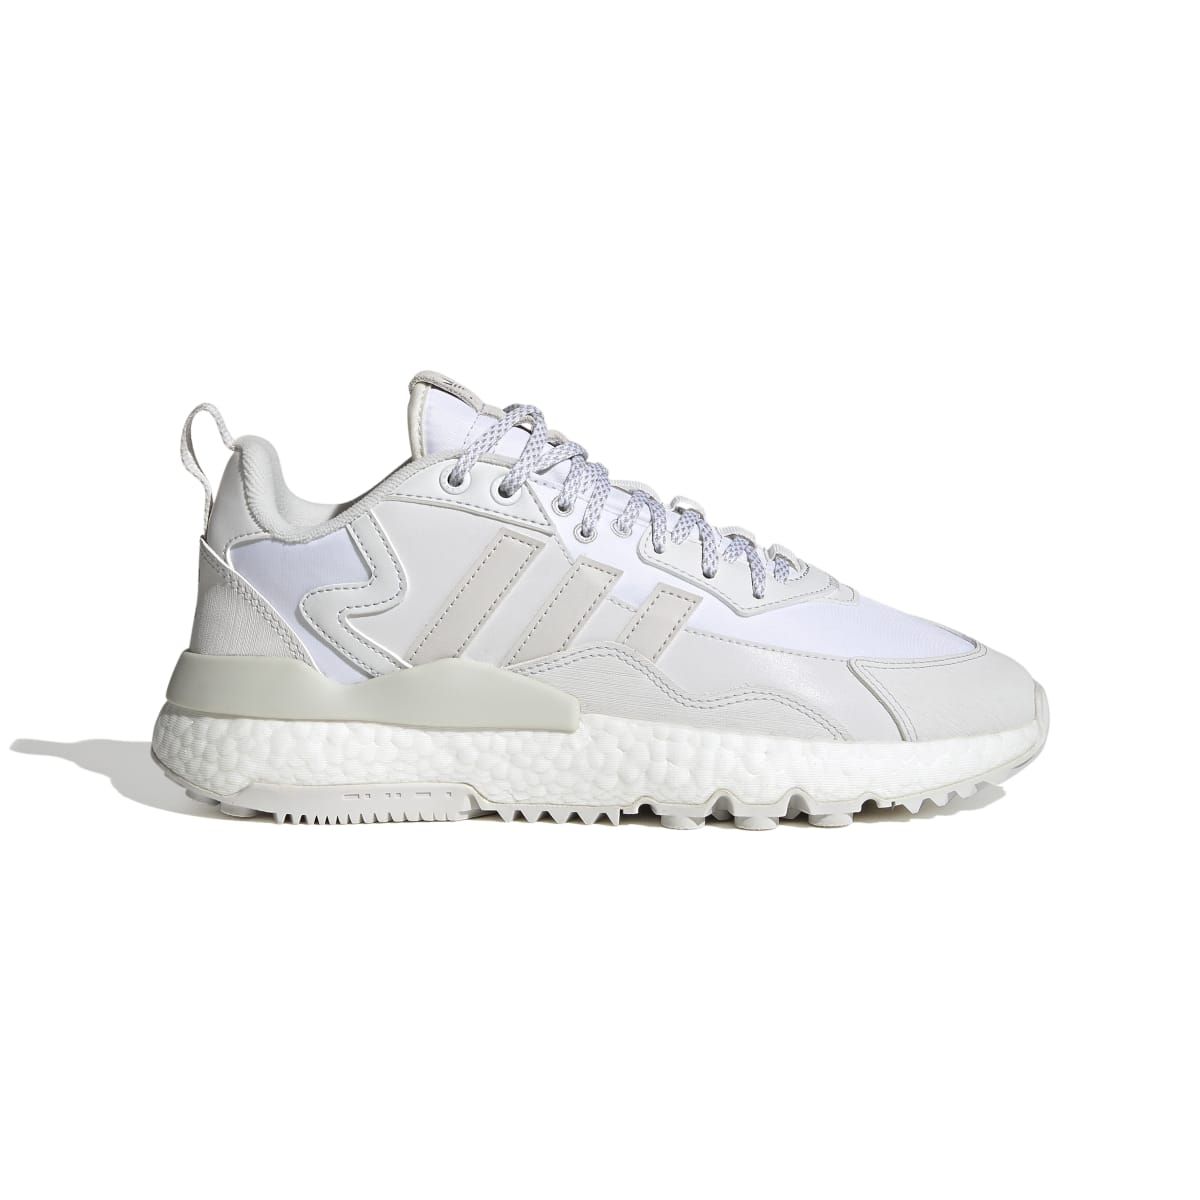 Mens Nite Jogger Winterized Trainers